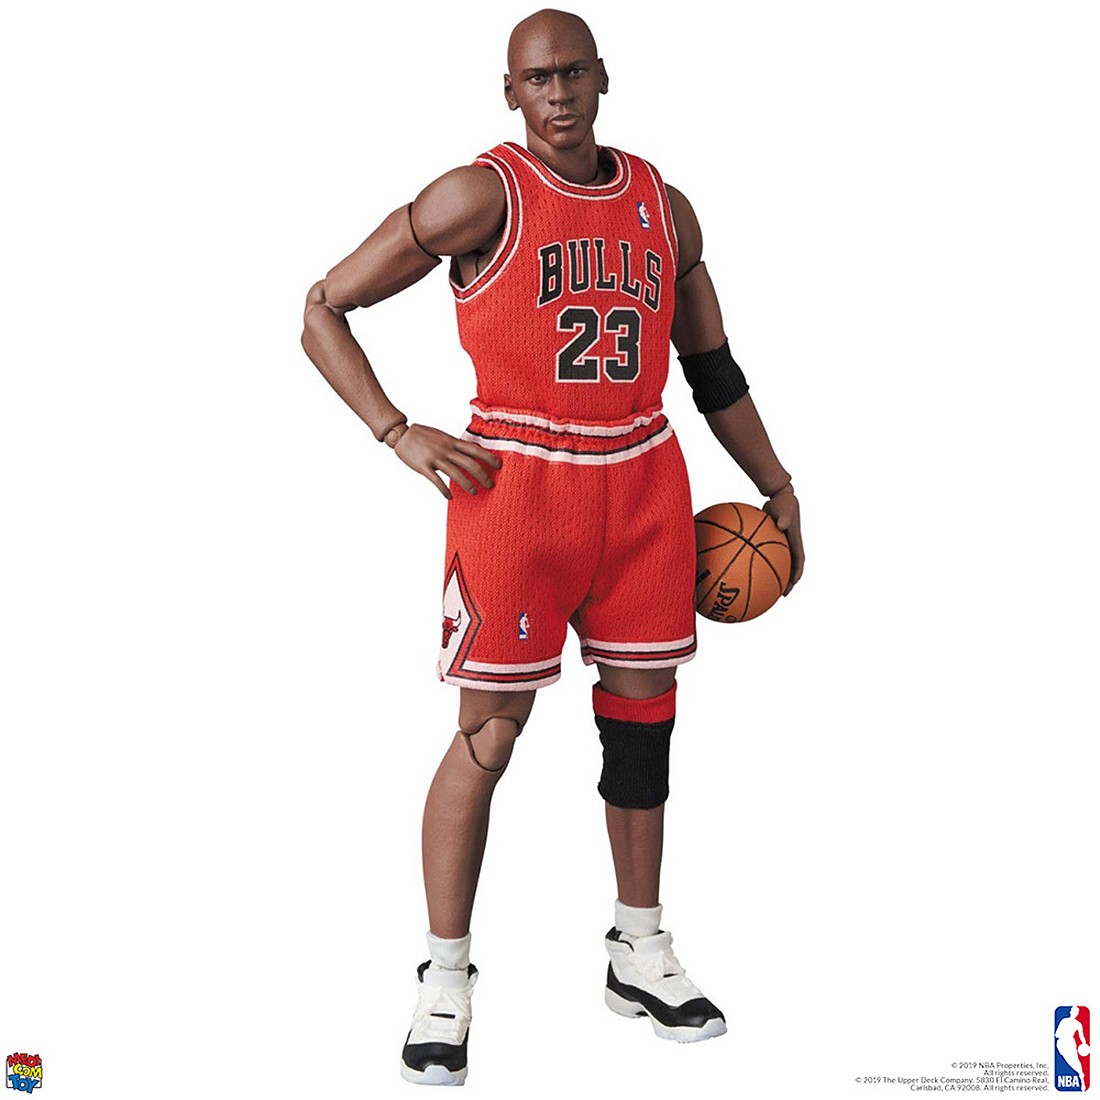 Medicom Toy MAFEX 1/12 Scale Action Figures - NBA Chicago Bulls